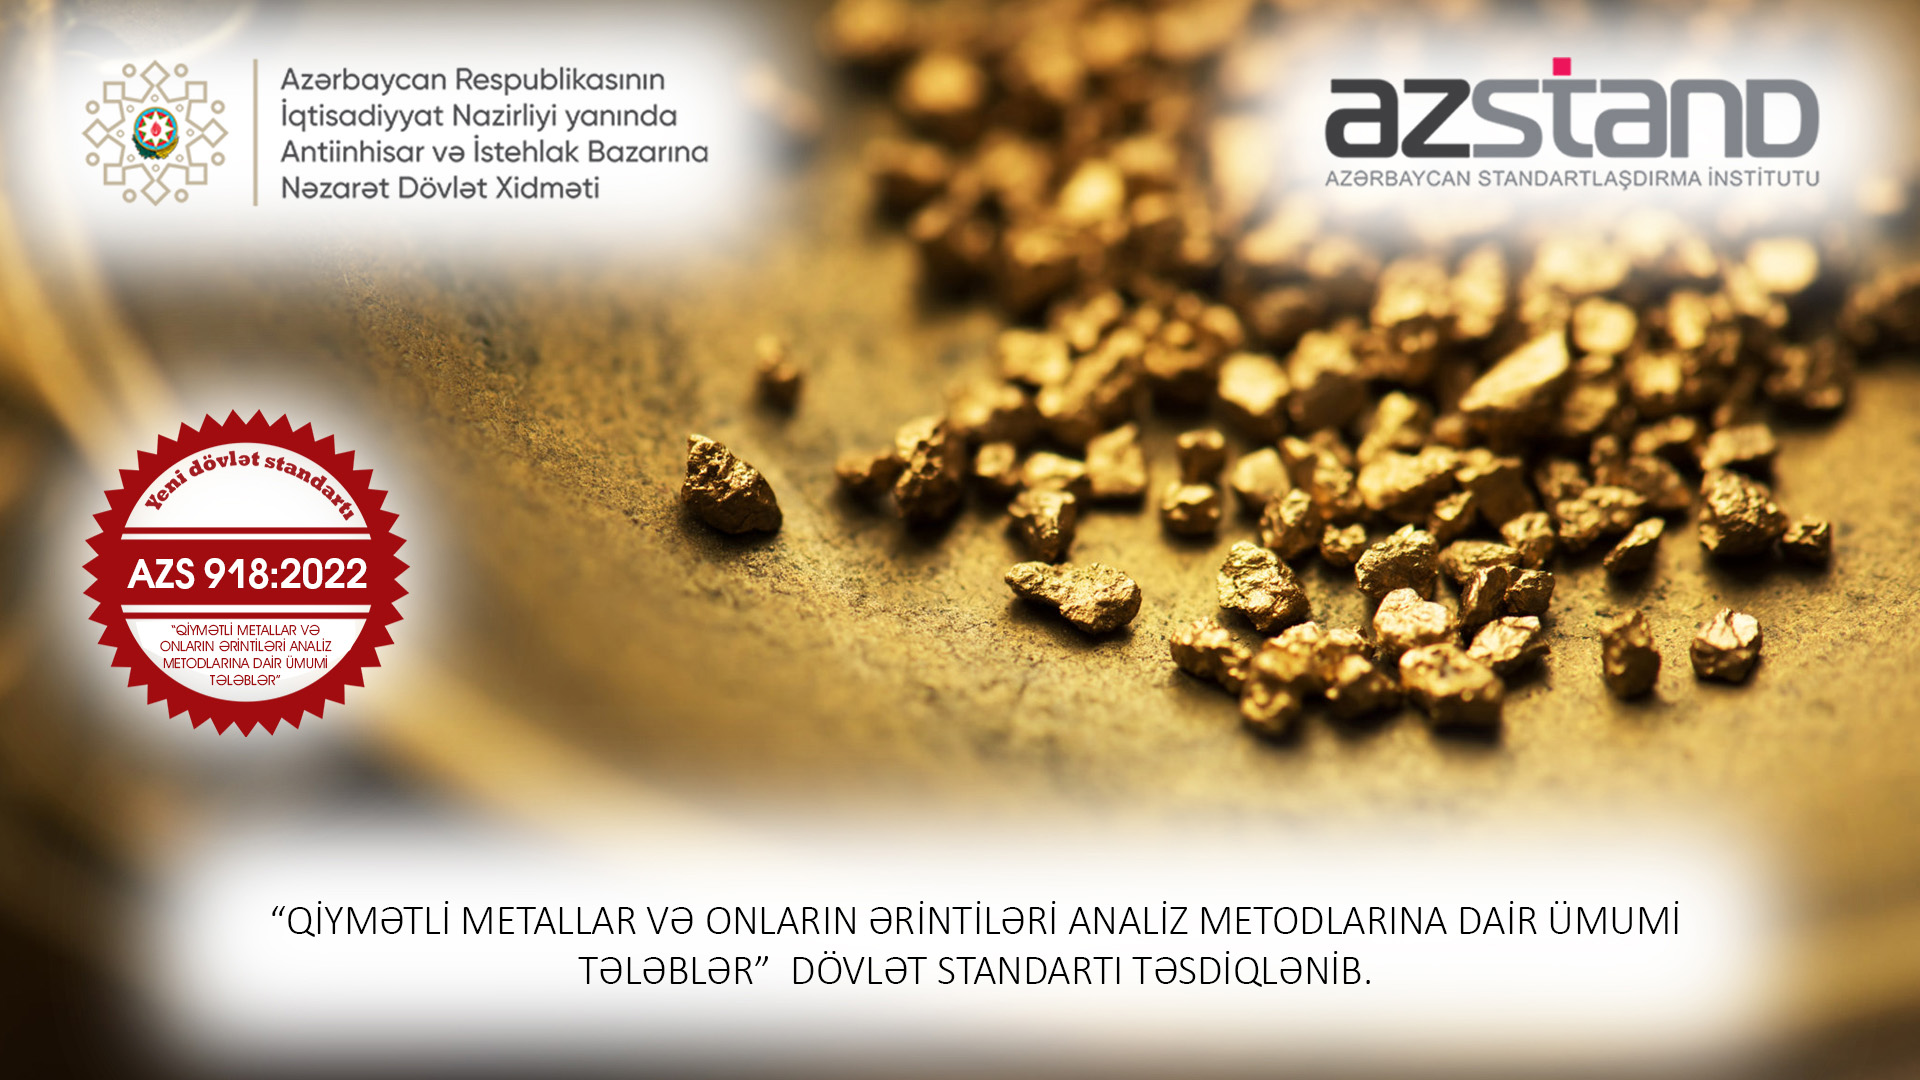 The state standard on methods of analysis of precious metals and their alloys was adopted